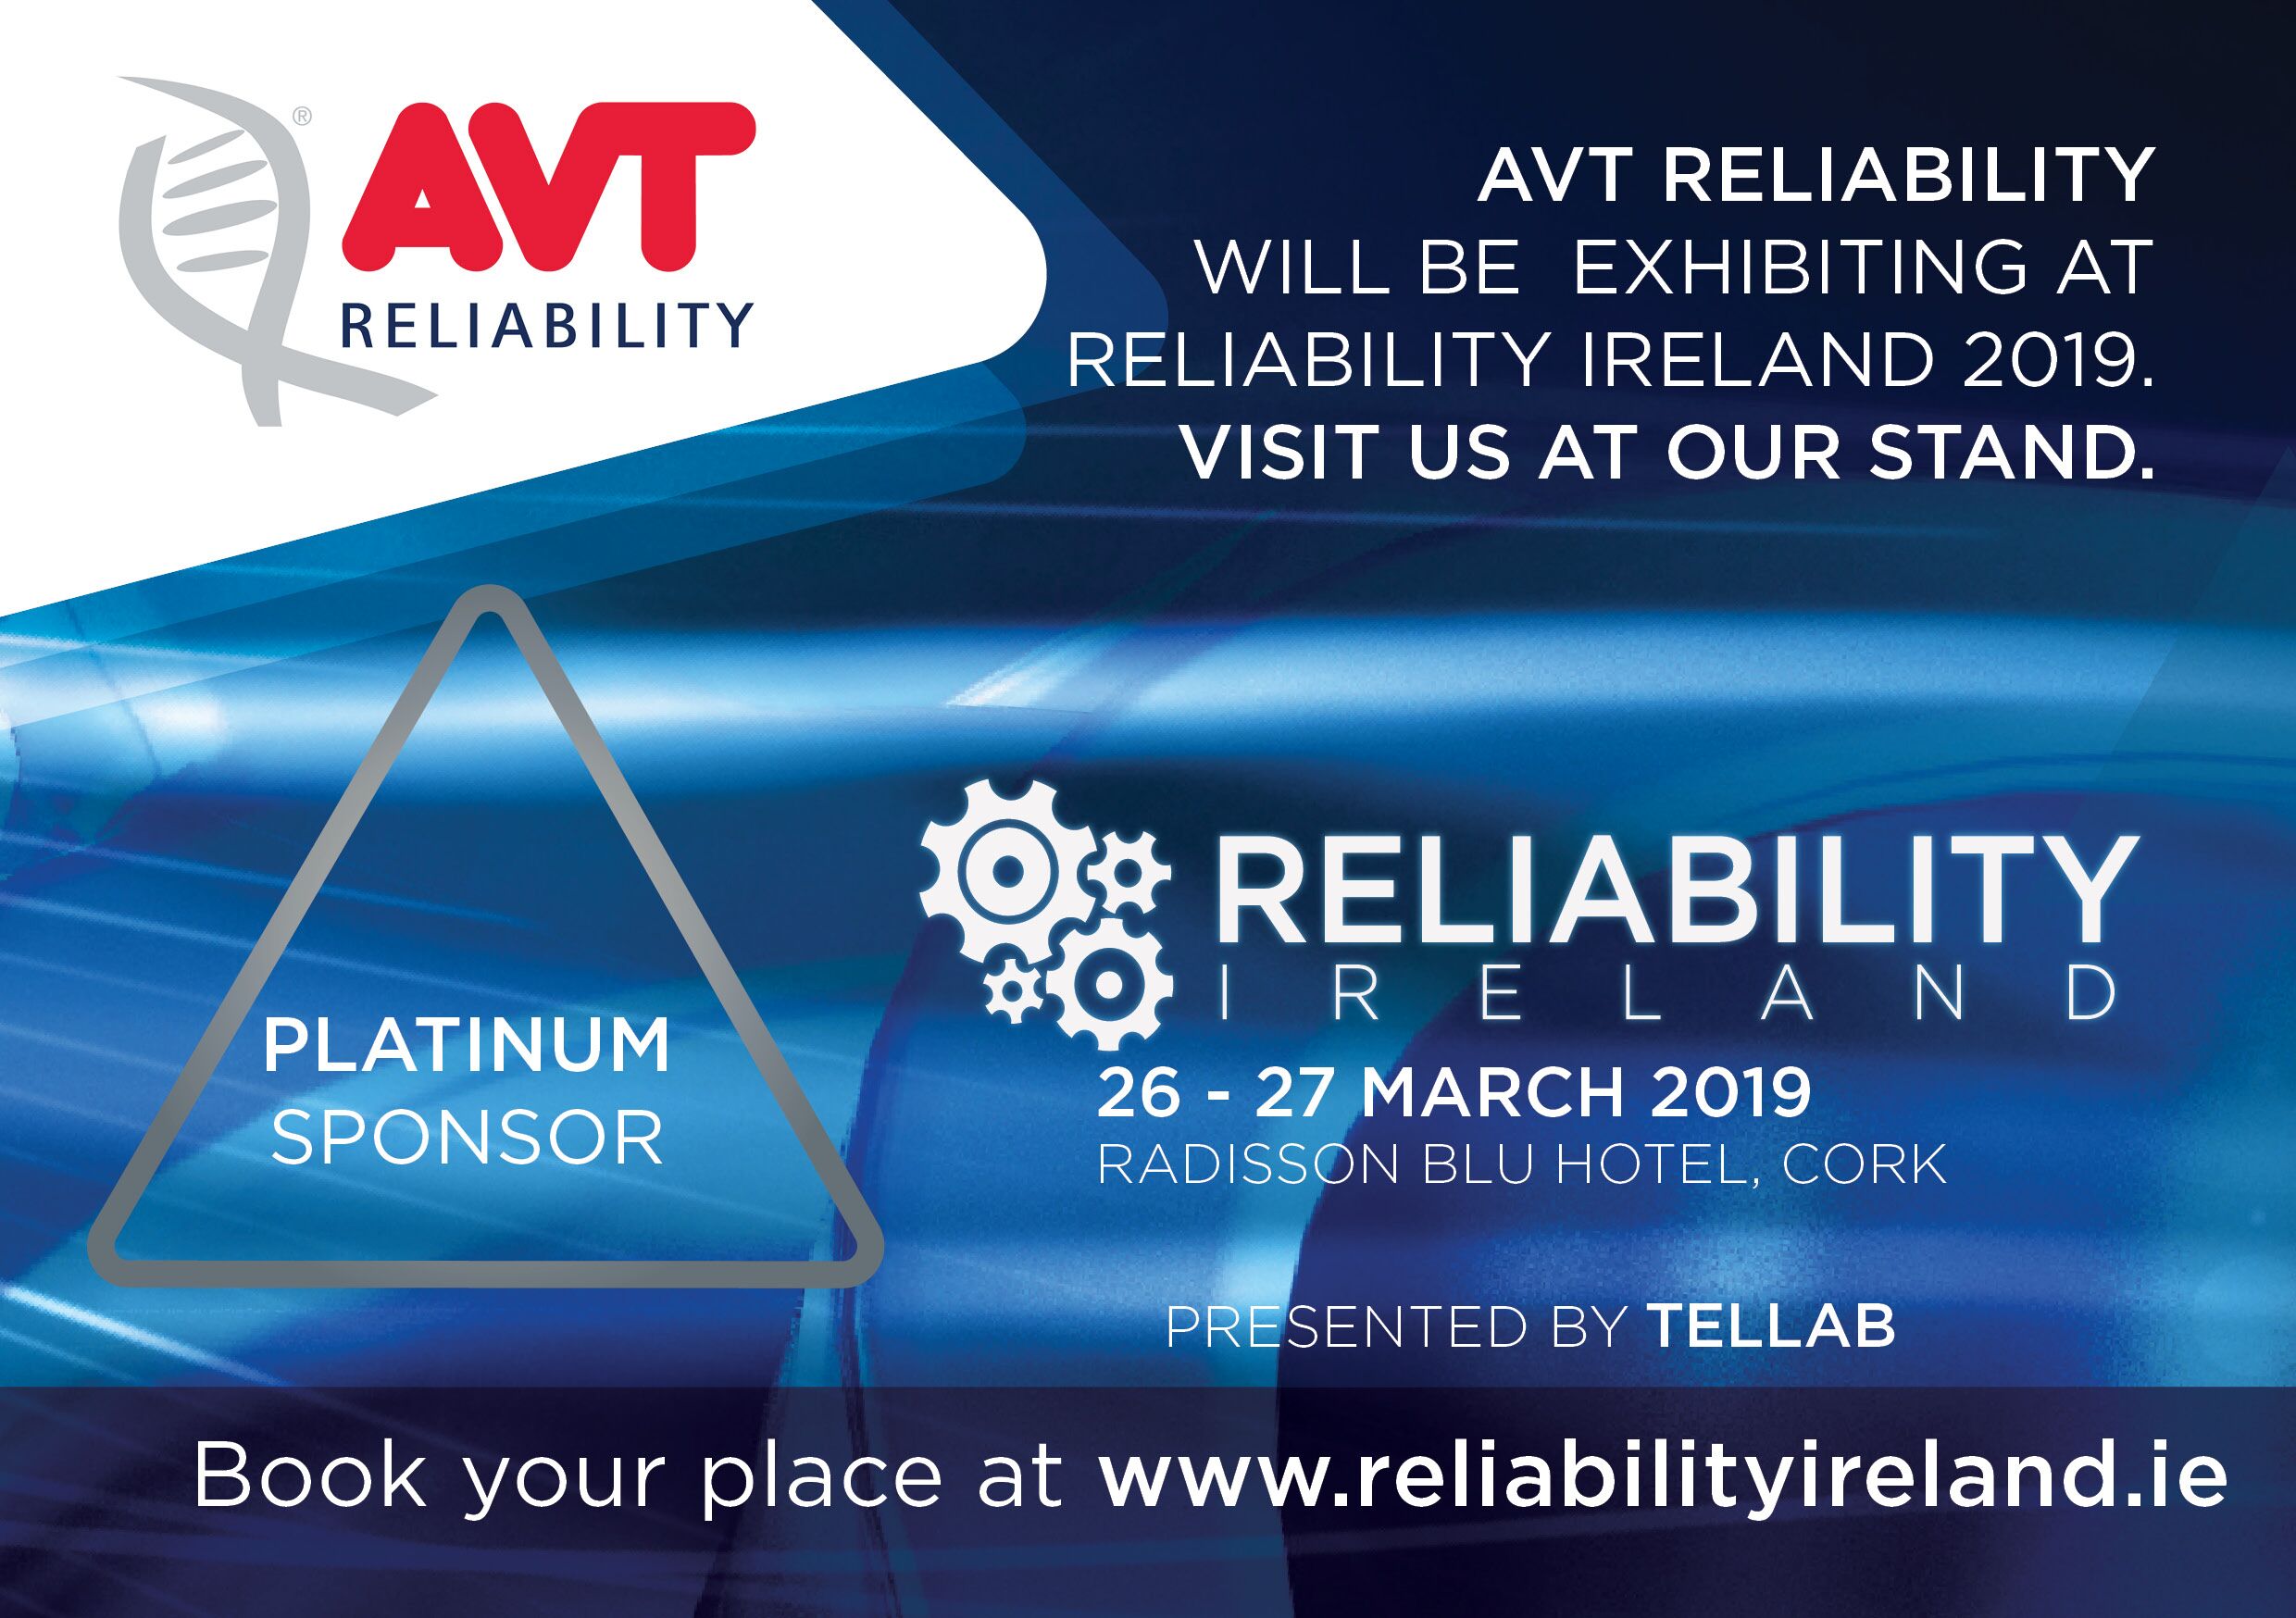 AVT Reliability is the lead sponsor at Reliability Ireland 2019.